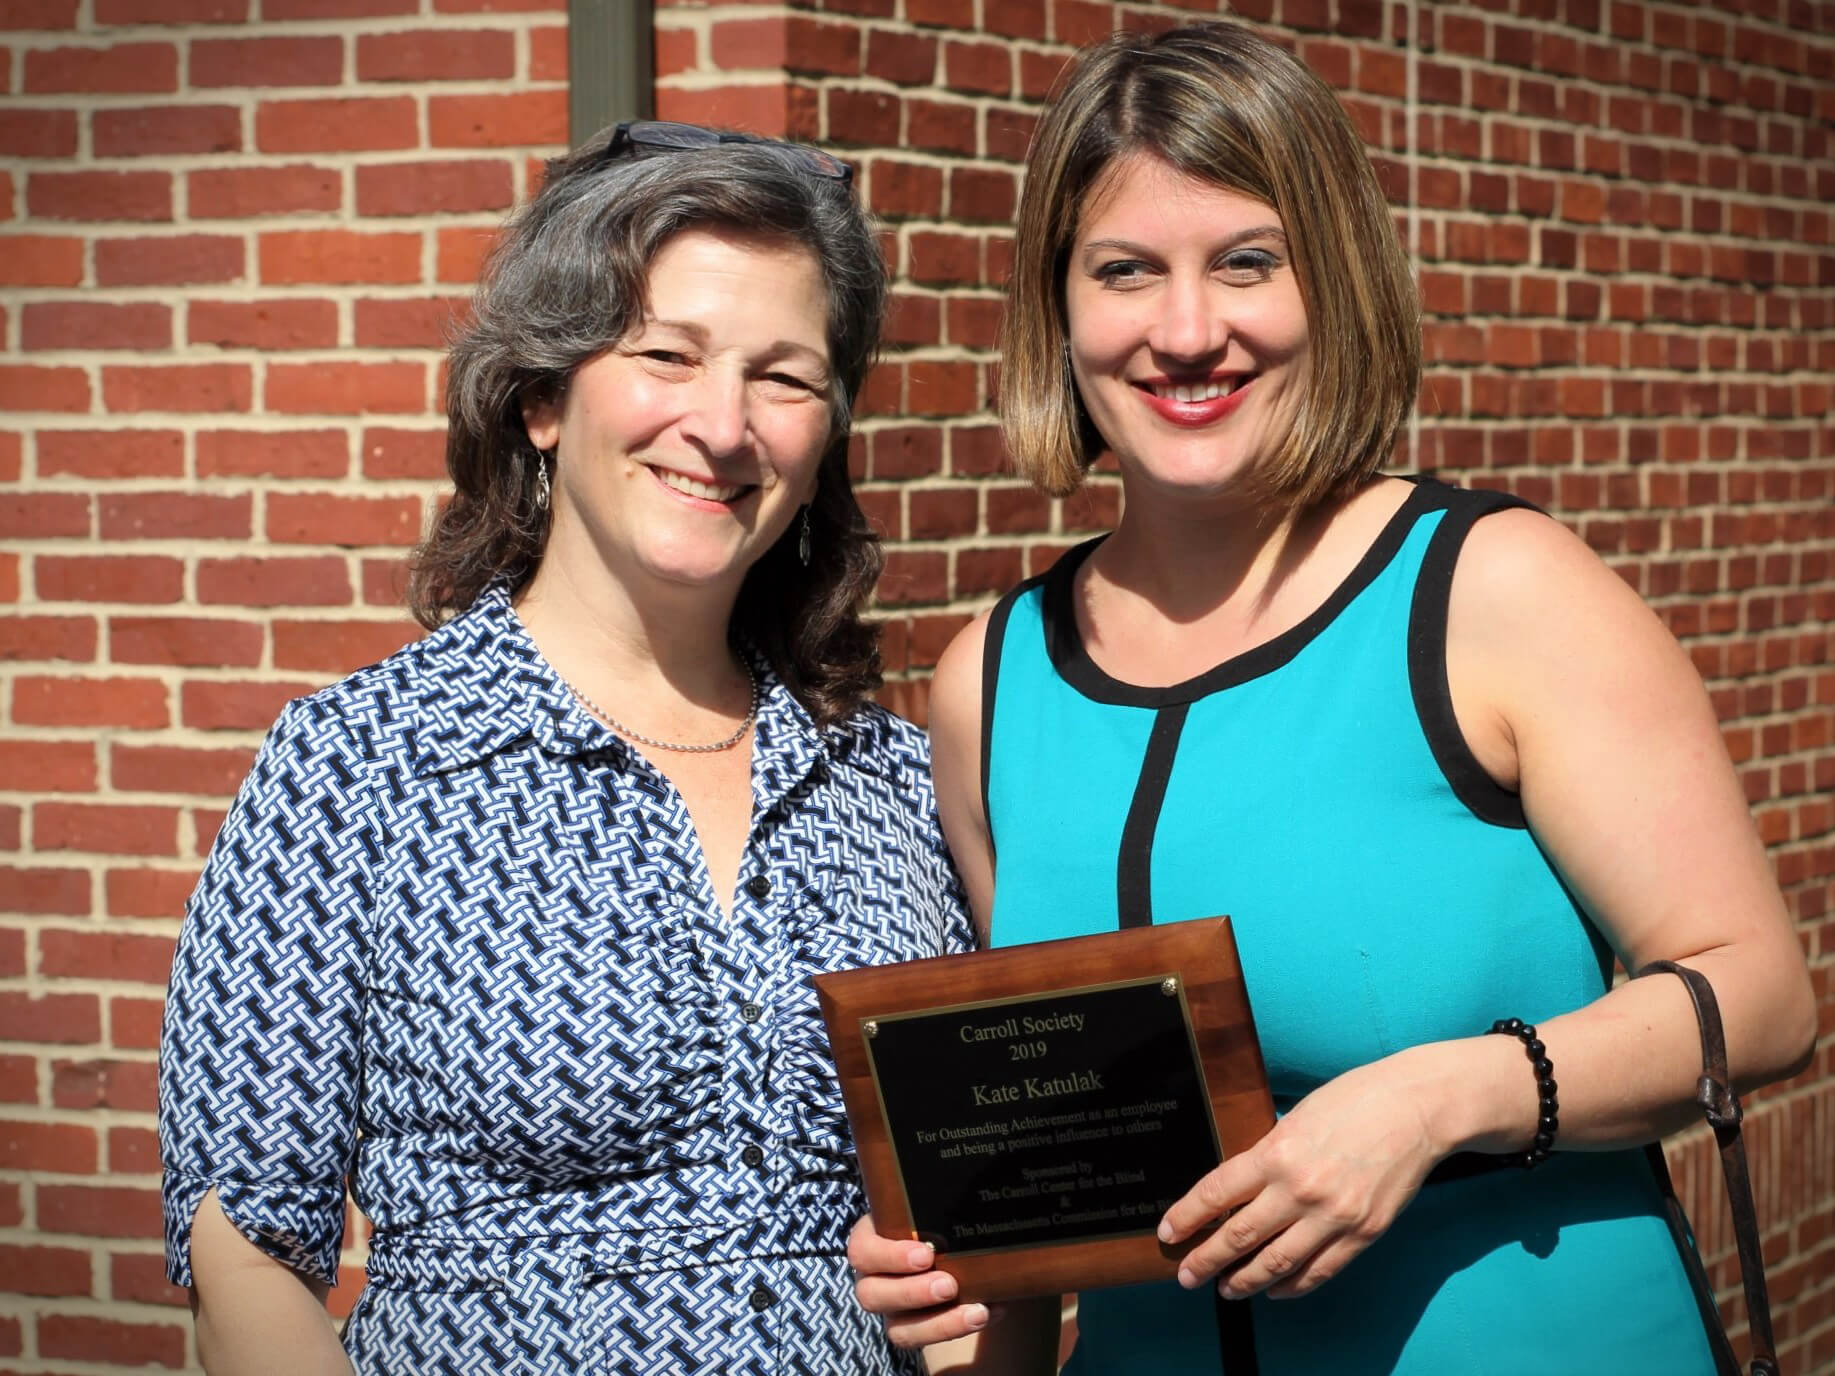 Kate Katulak smiles with her nominating supervisor at the 2019 Carroll Society Awards she was recognized at.